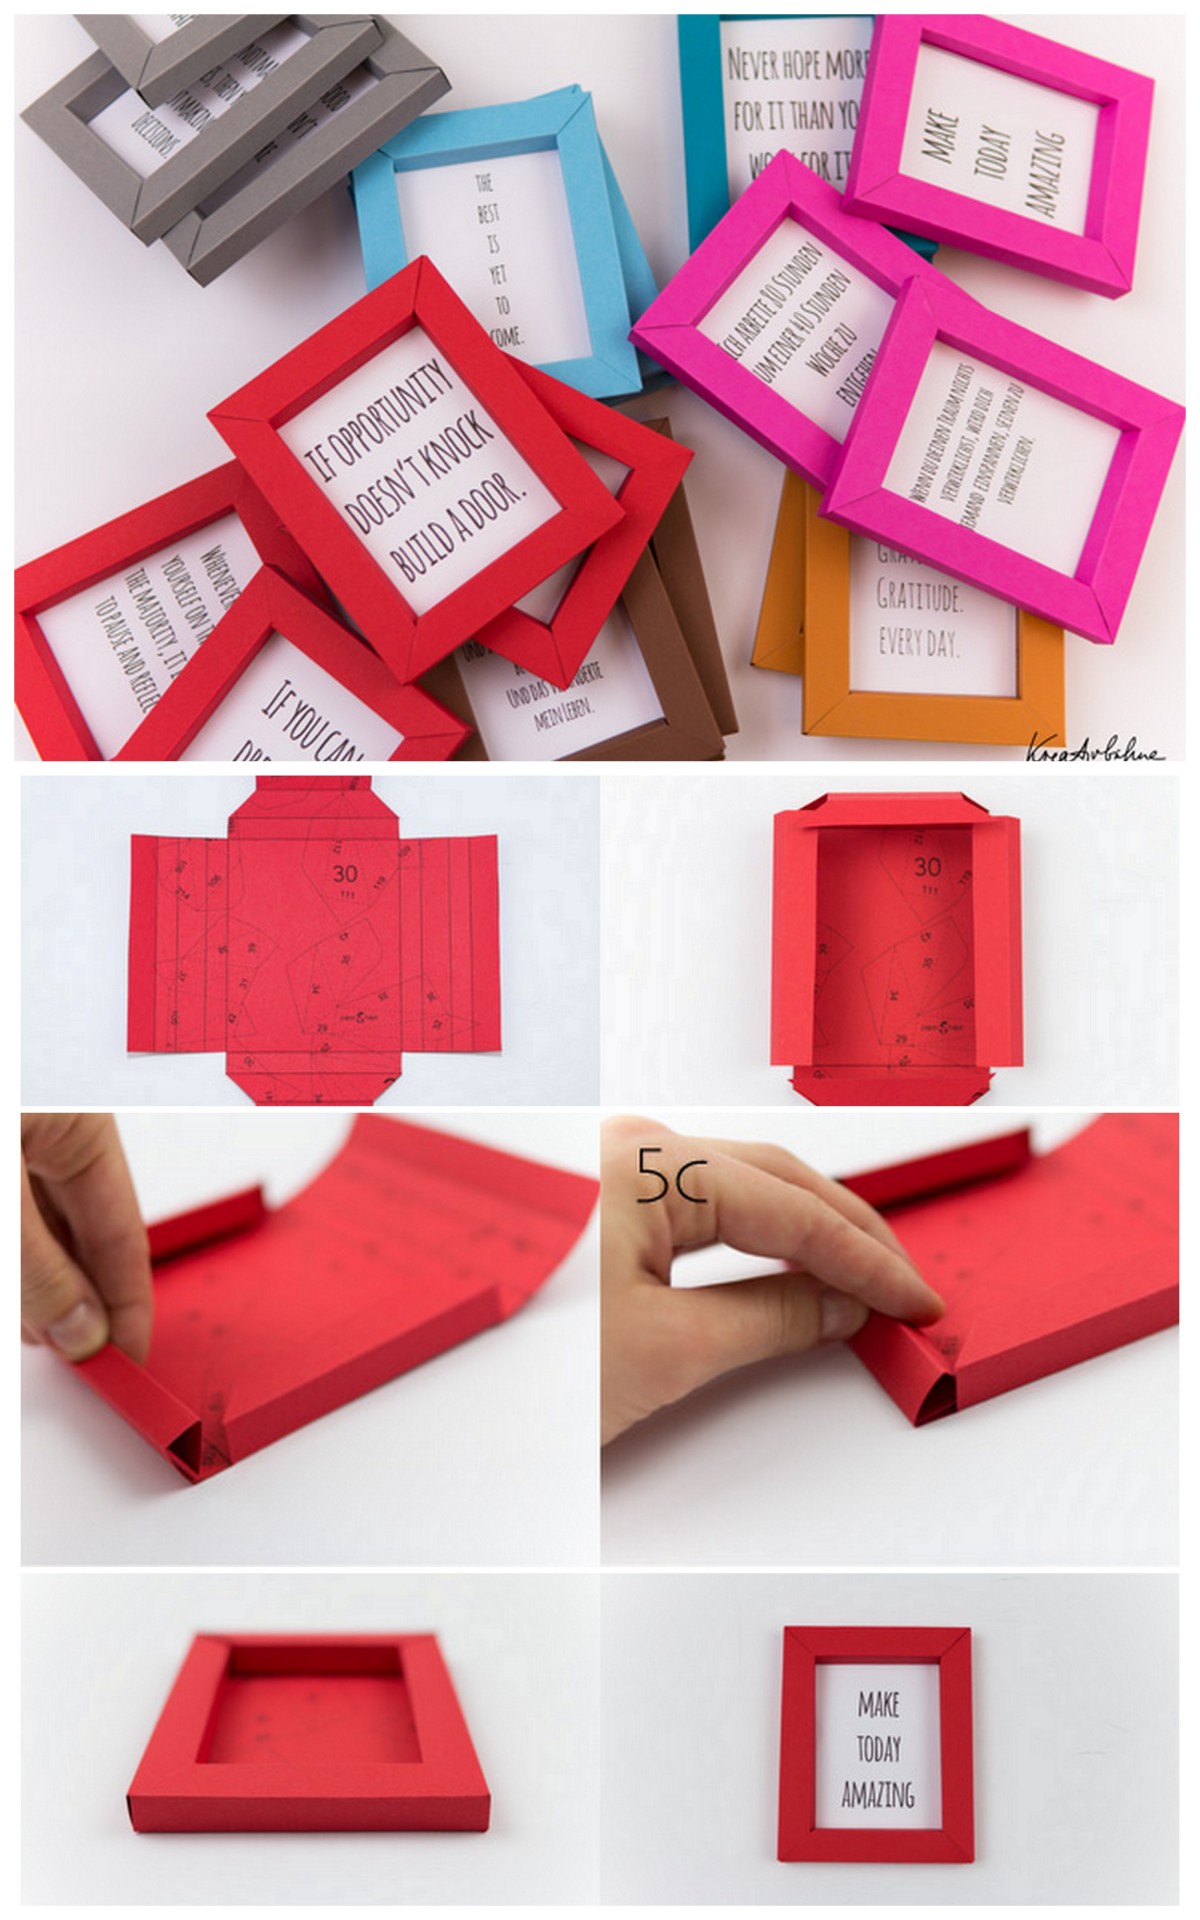 DIY Paper Frame Tutorial and Printable from kreativbuehne